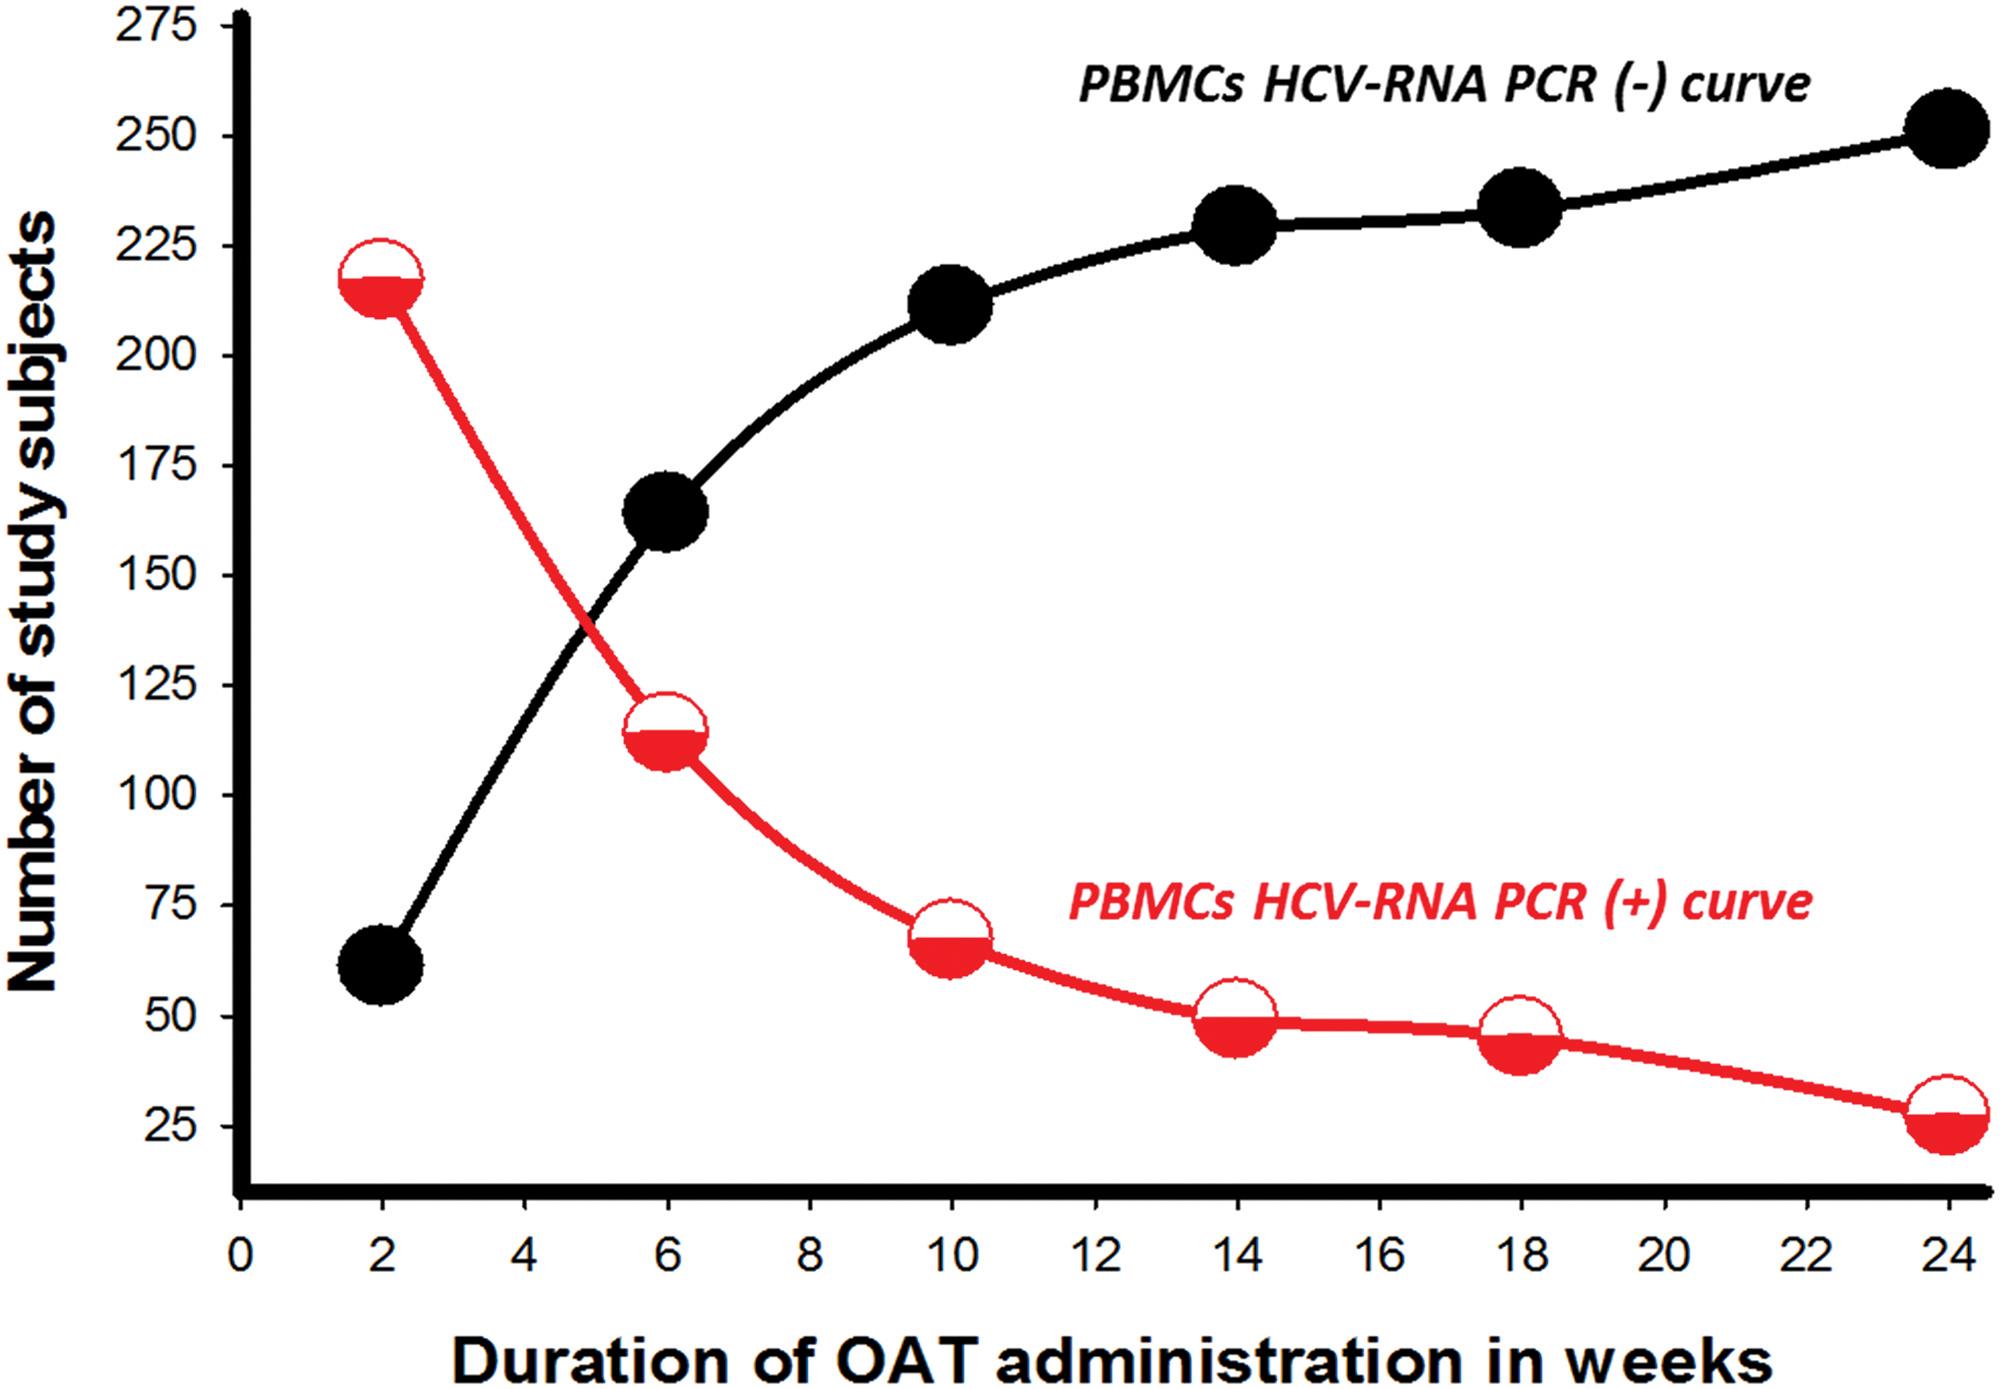 Follow-up of anti-HCV OAT outcomes by PBMCs RNA PCR(−) compared to PBMCs RNA PCR(+) during application of the CTF2-protocol.